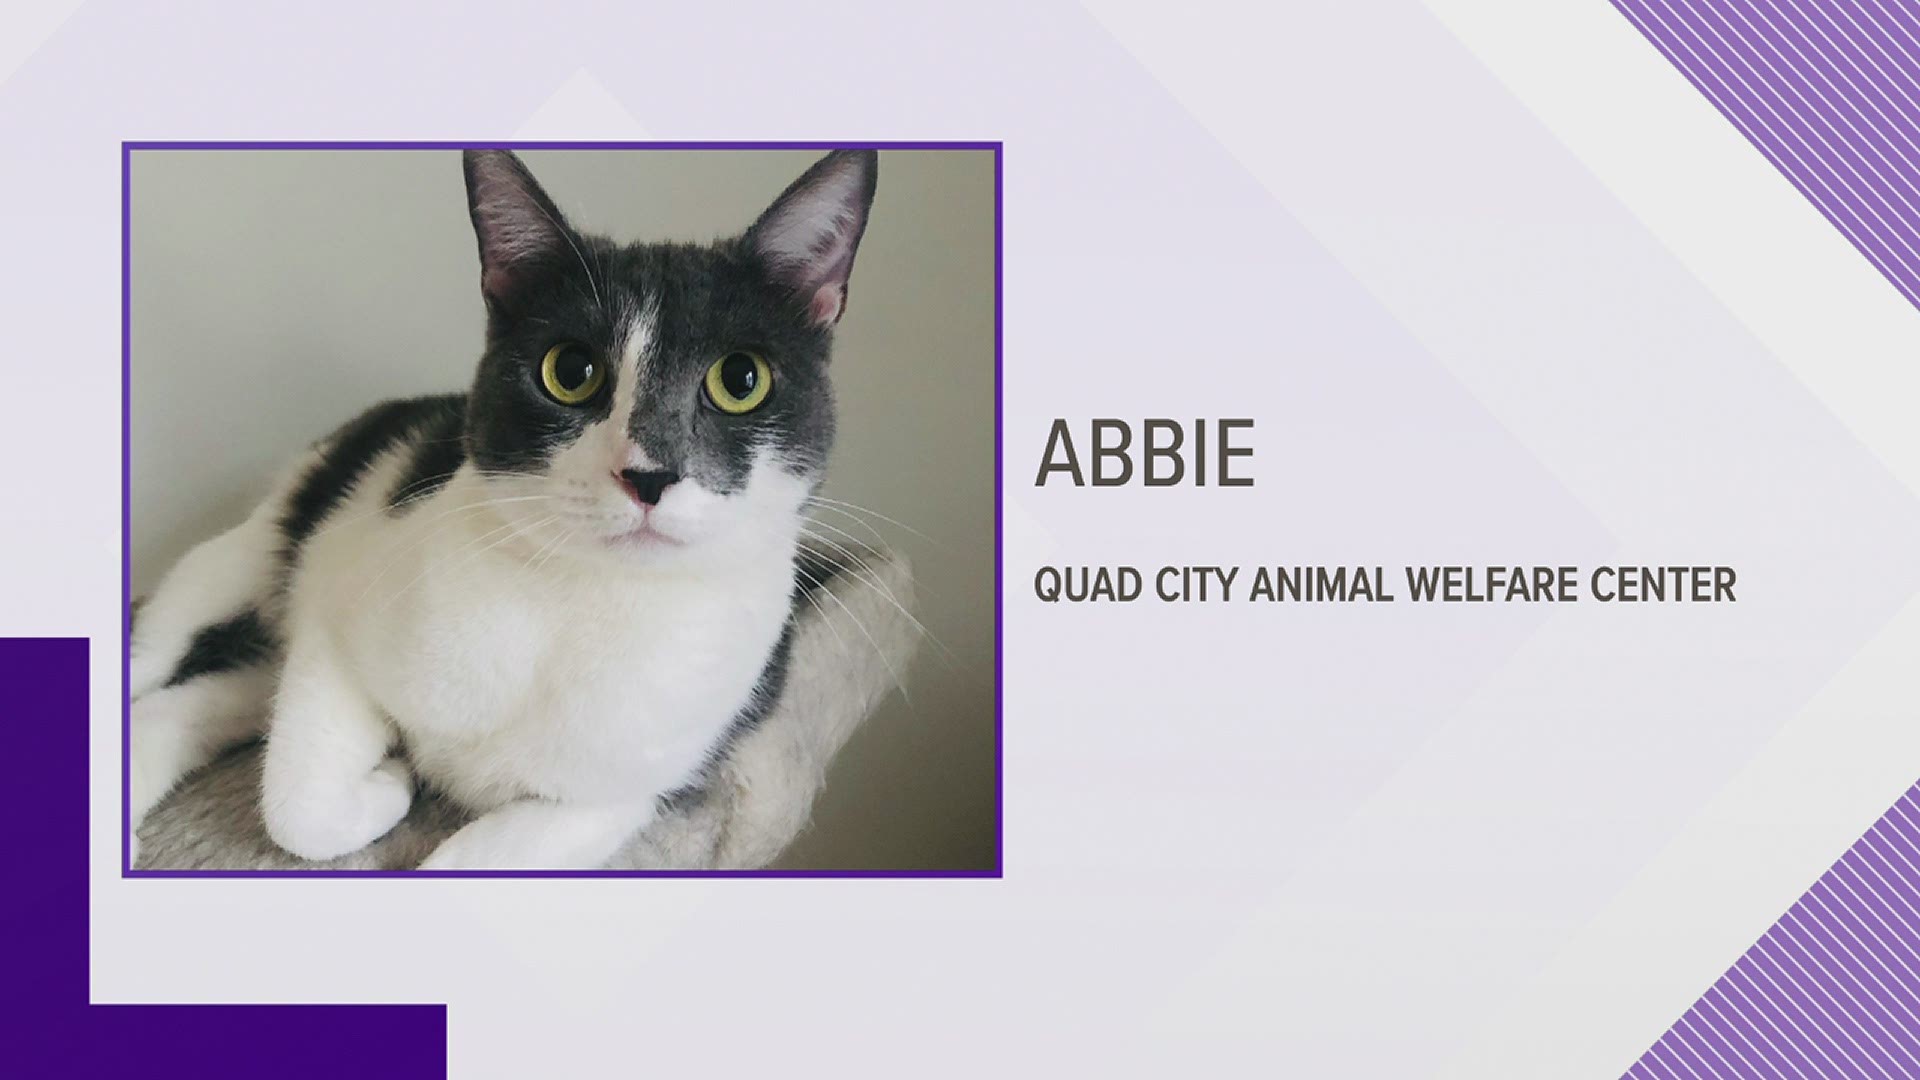 The Quad City Animal Welfare Center's Pet of the Week for October 26th is Abbie the Active Cat!